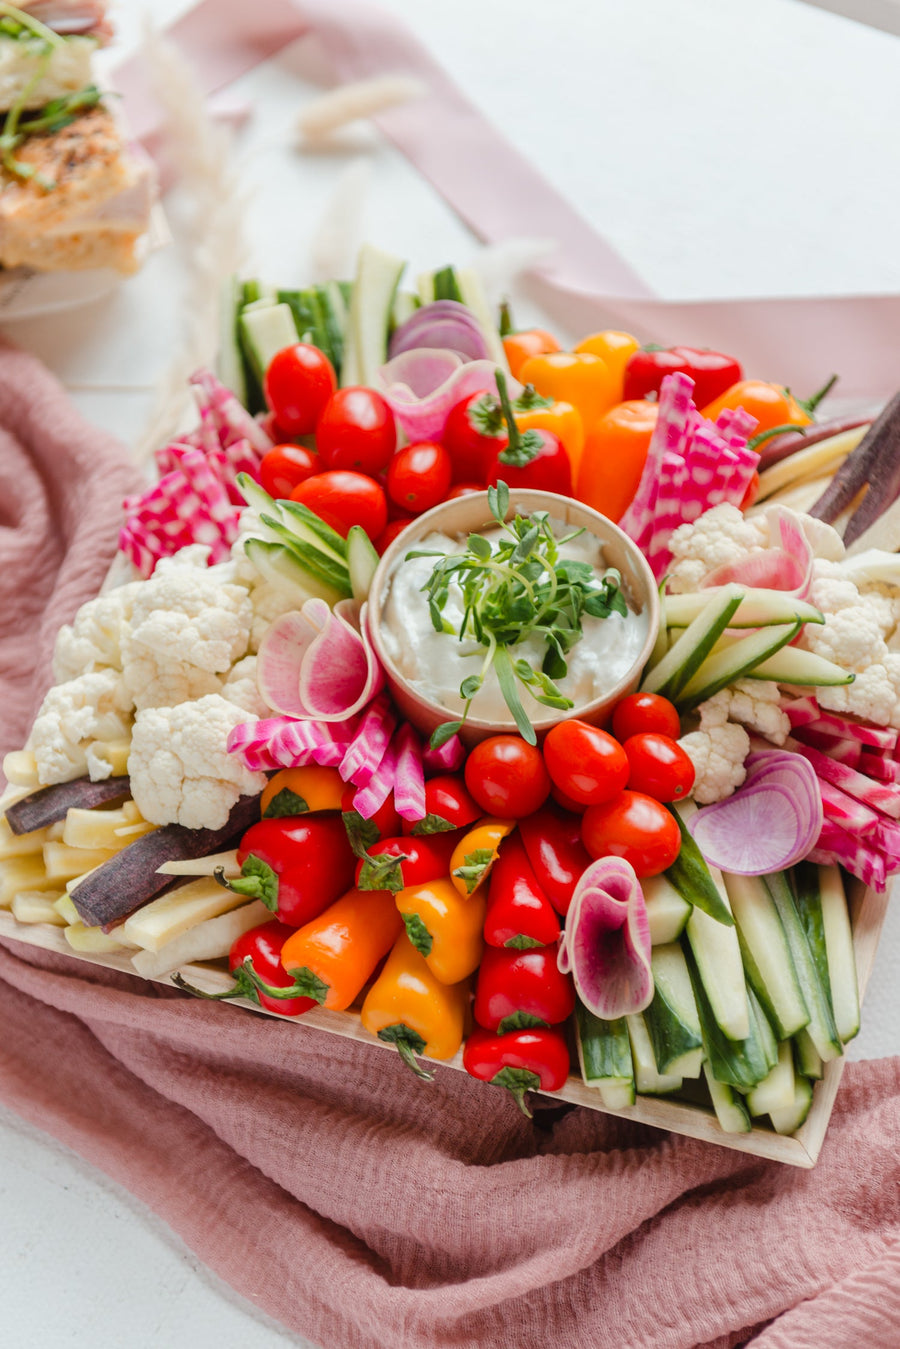 Vegetable Platter Vegetable Tray Corporate Catering Toronto Delivery 